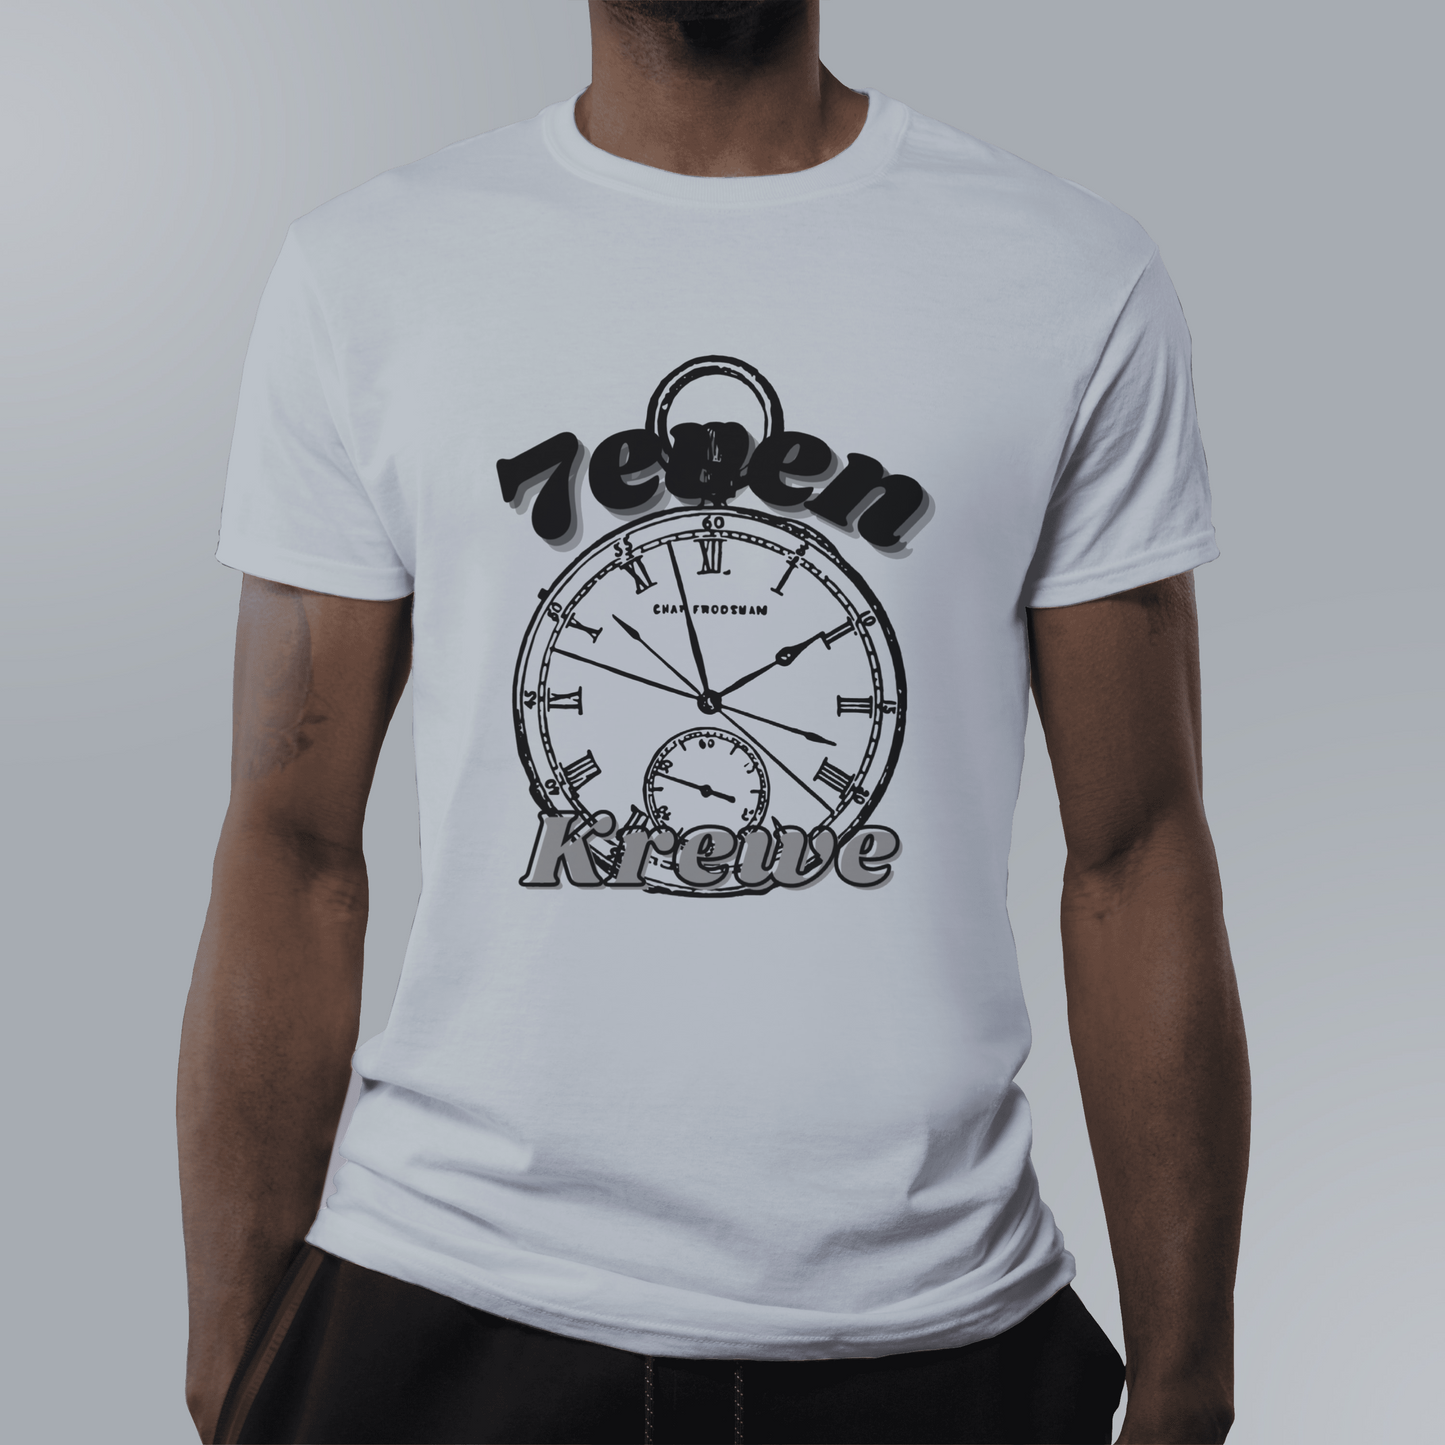 "The Time is 7even" Krewe Tee WITHOUT speckles